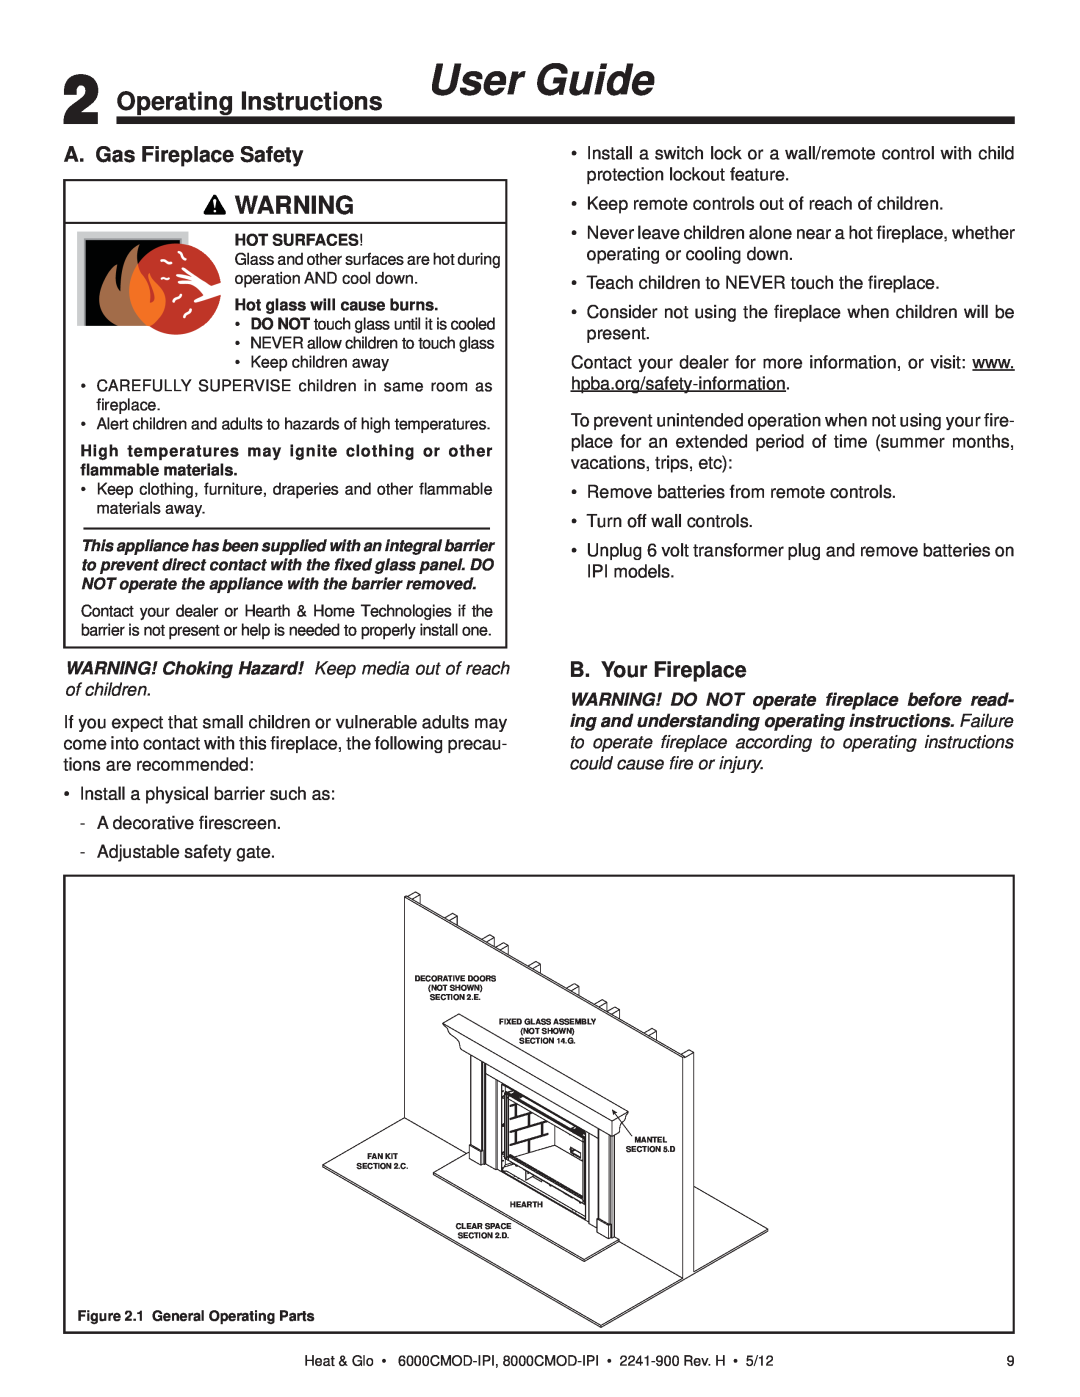 Heat & Glo LifeStyle 6000CMOD-IPI Operating Instructions User Guide, A. Gas Fireplace Safety, B. Your Fireplace 